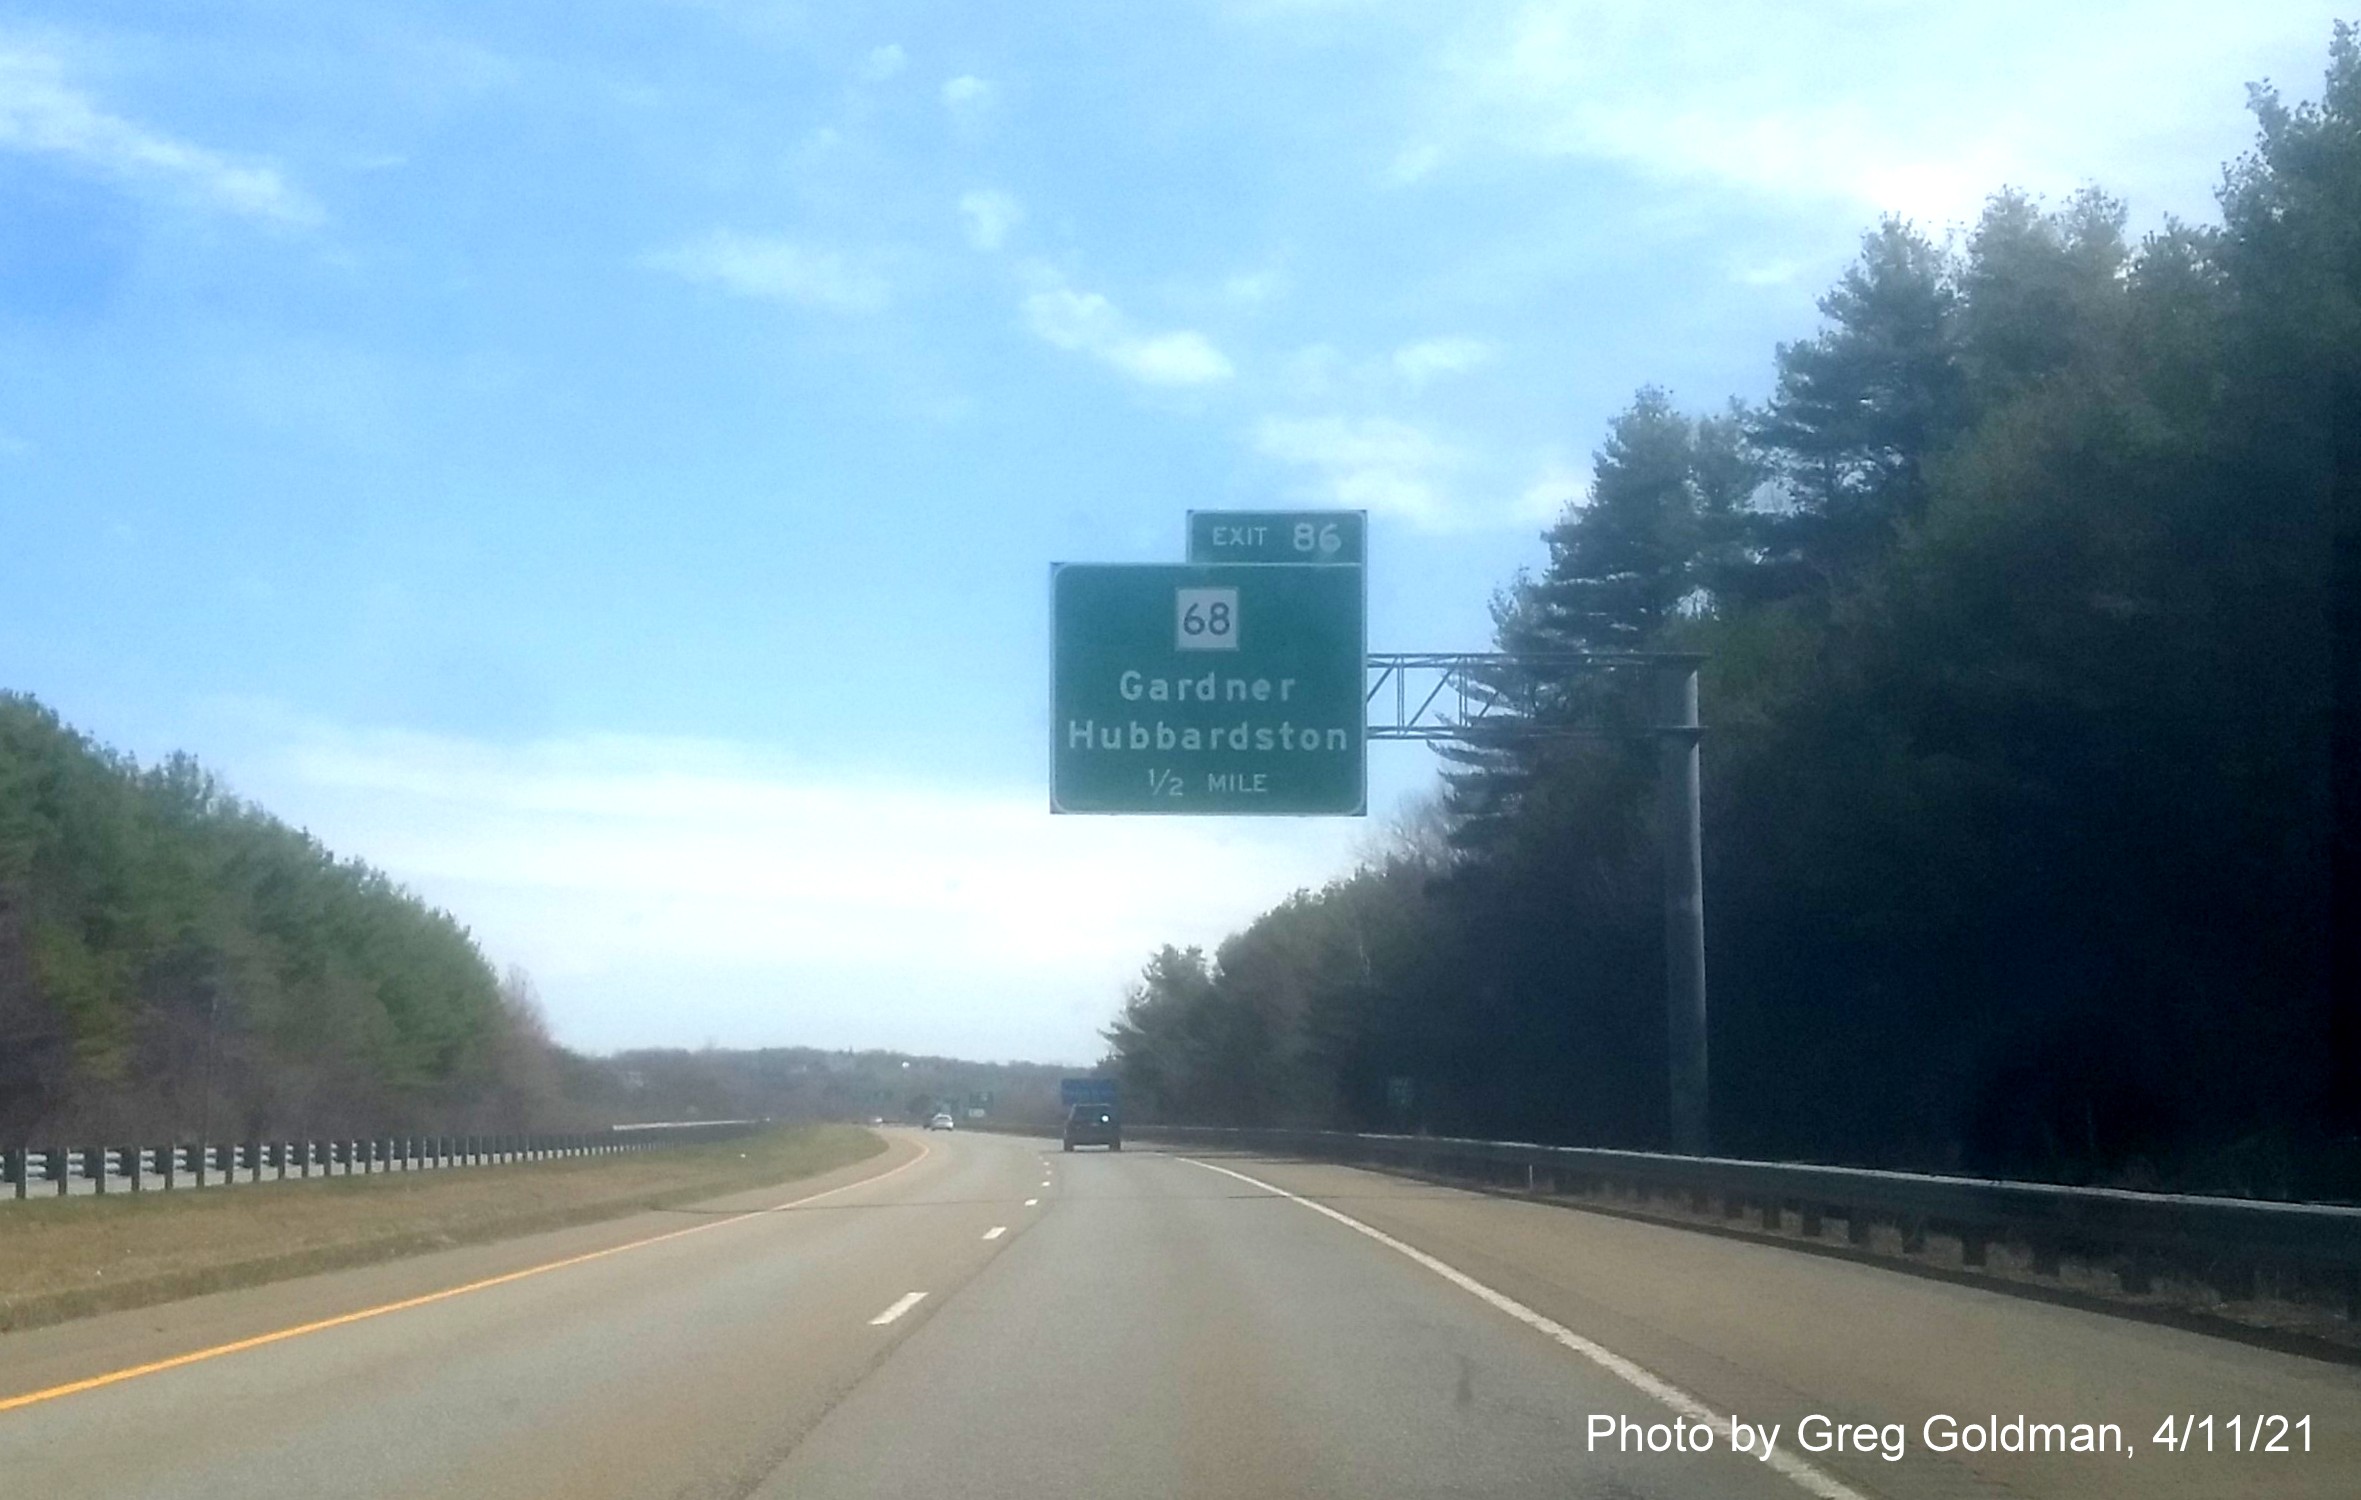 Image of 1/2 Mile advance sign for MA 68 Exit with new milepost based exit number on MA 2 East in Gardner, by Greg Goldman, April 2021